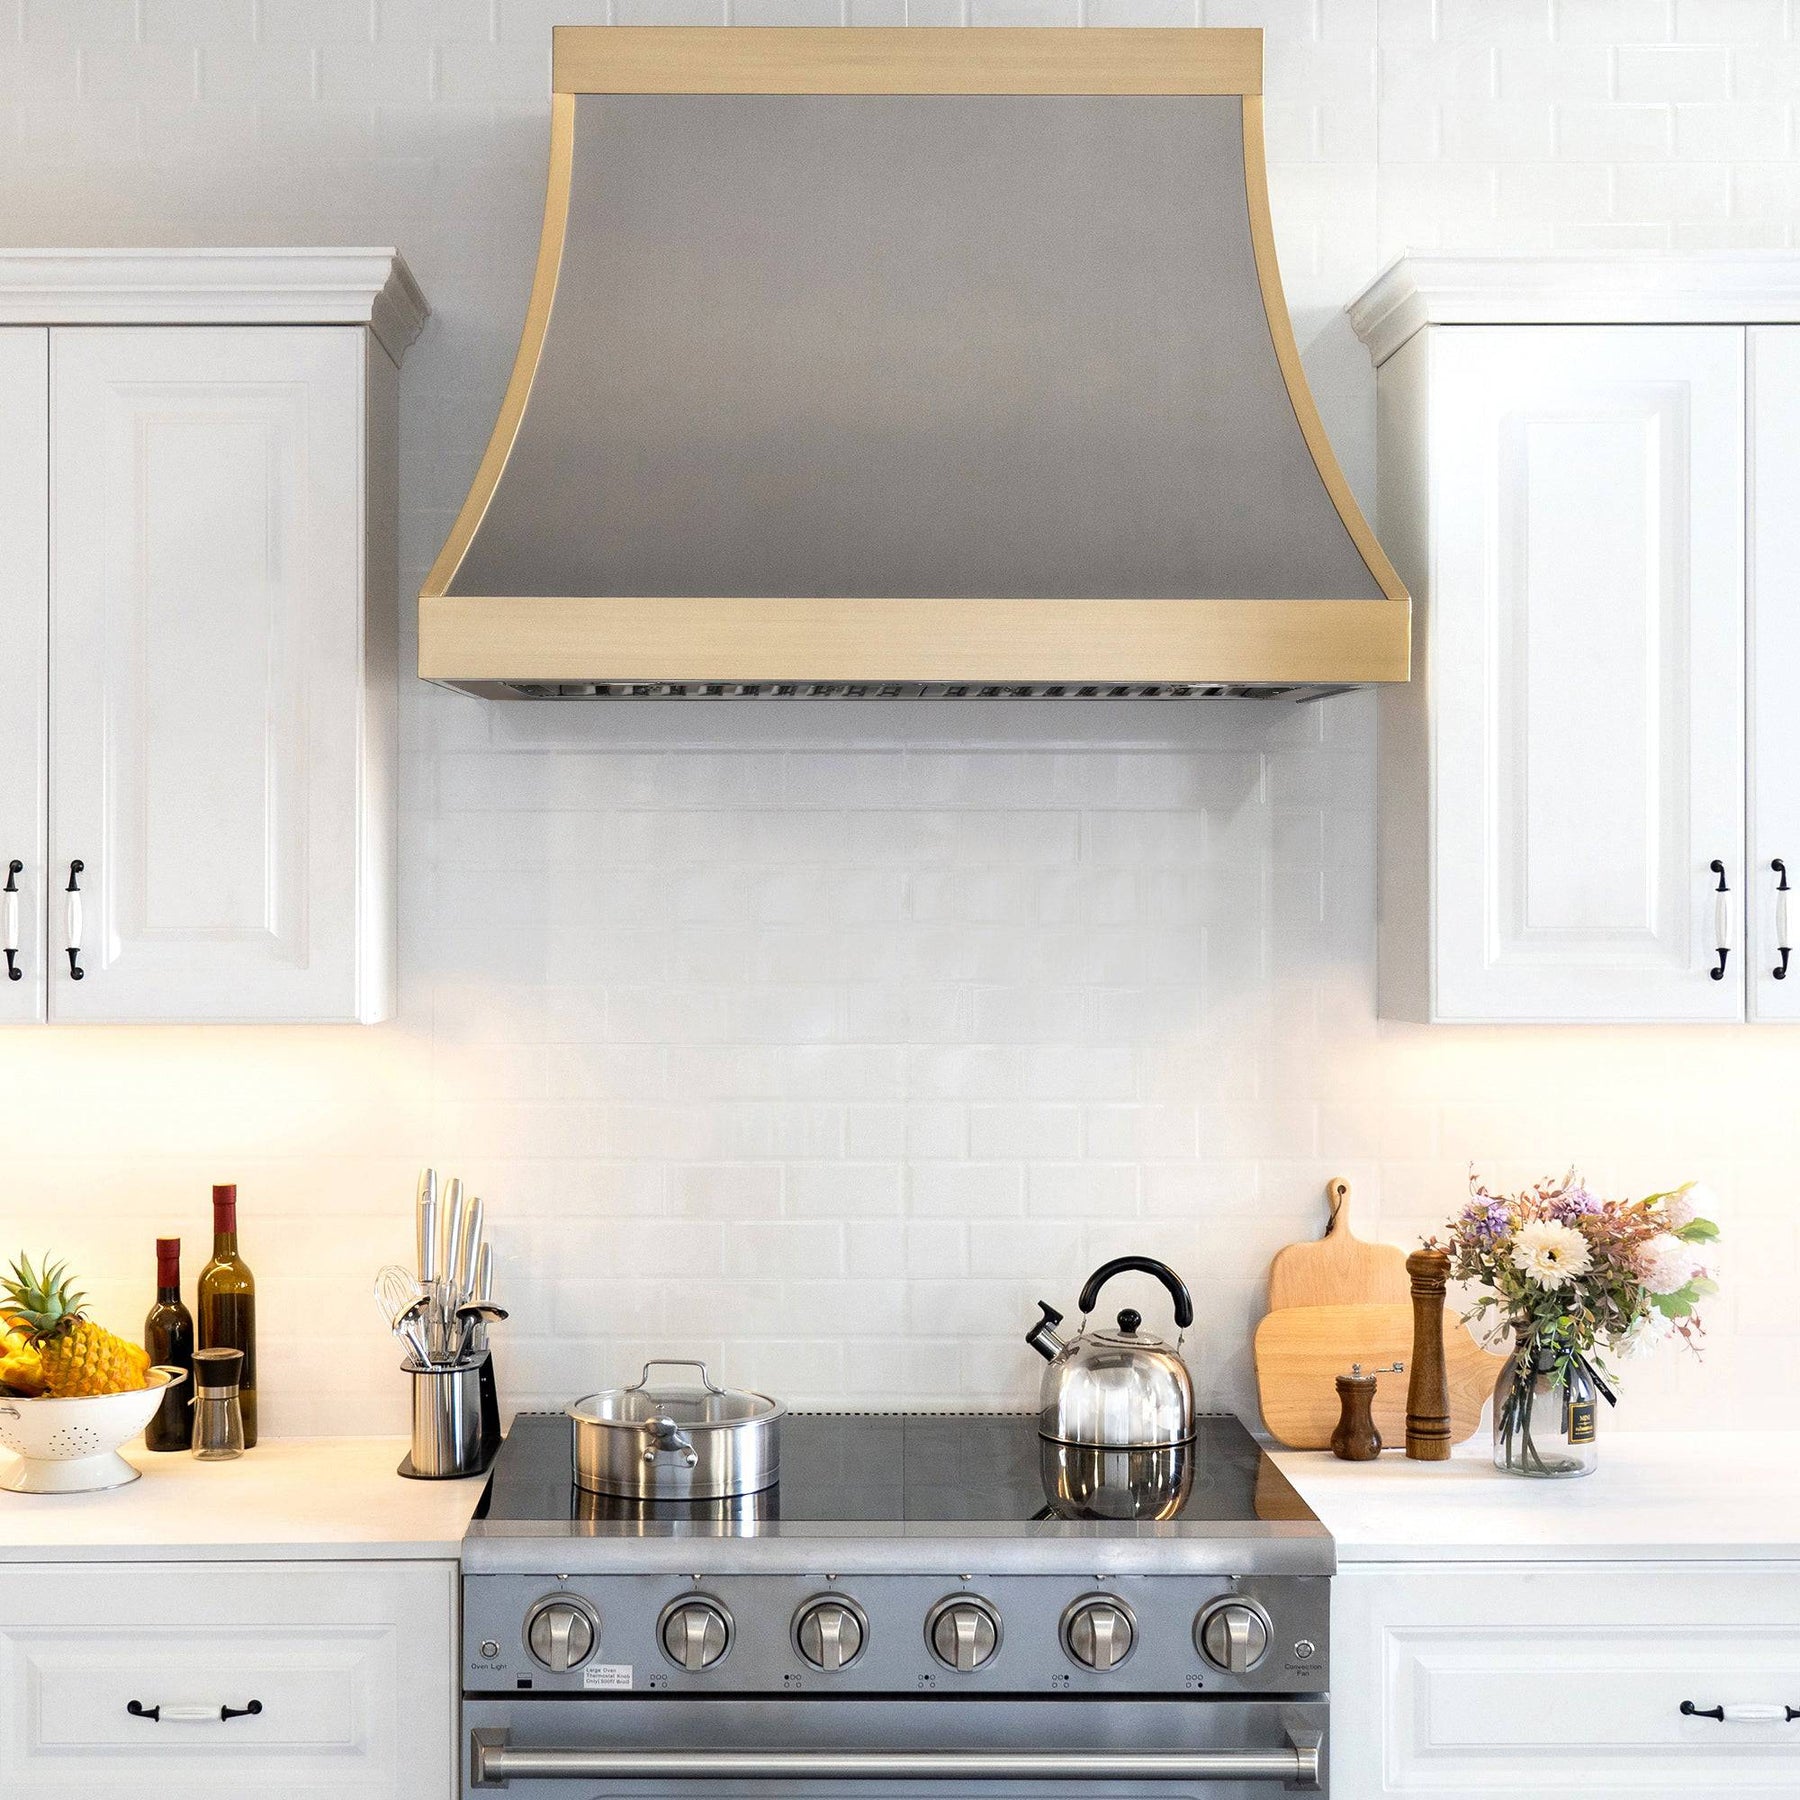 Fobest Handcrafted Custom Brushed Stainless Steel Range Hood FSS-94 - Stainless Steel Range Hood-Fobest Appliance